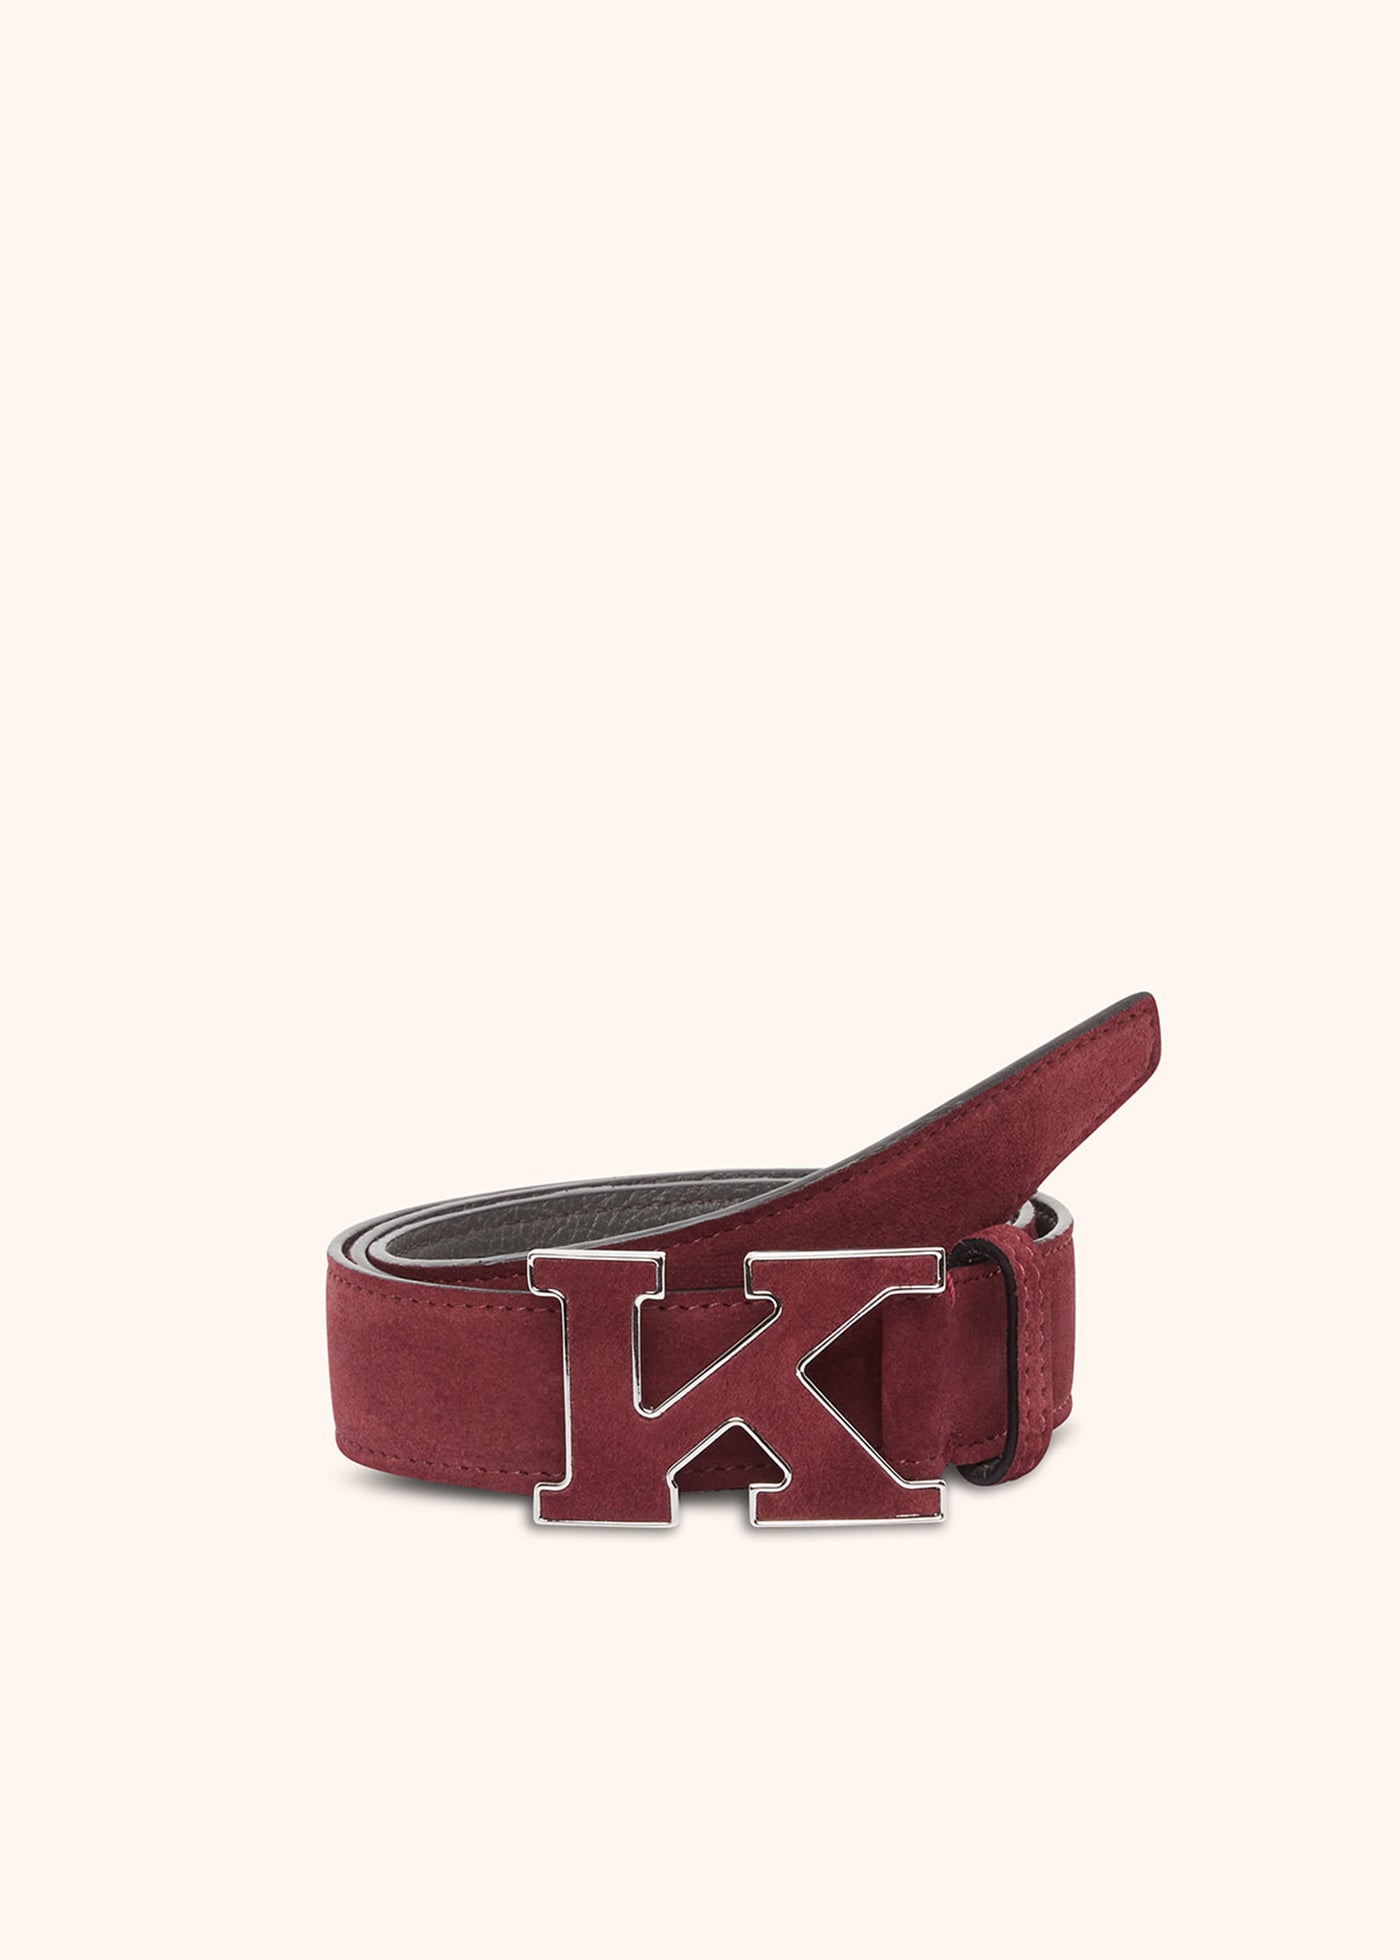 Burgundy Leather Belt Strap For Louis Vuitton Buckle Men Women 35mm Real  Leather